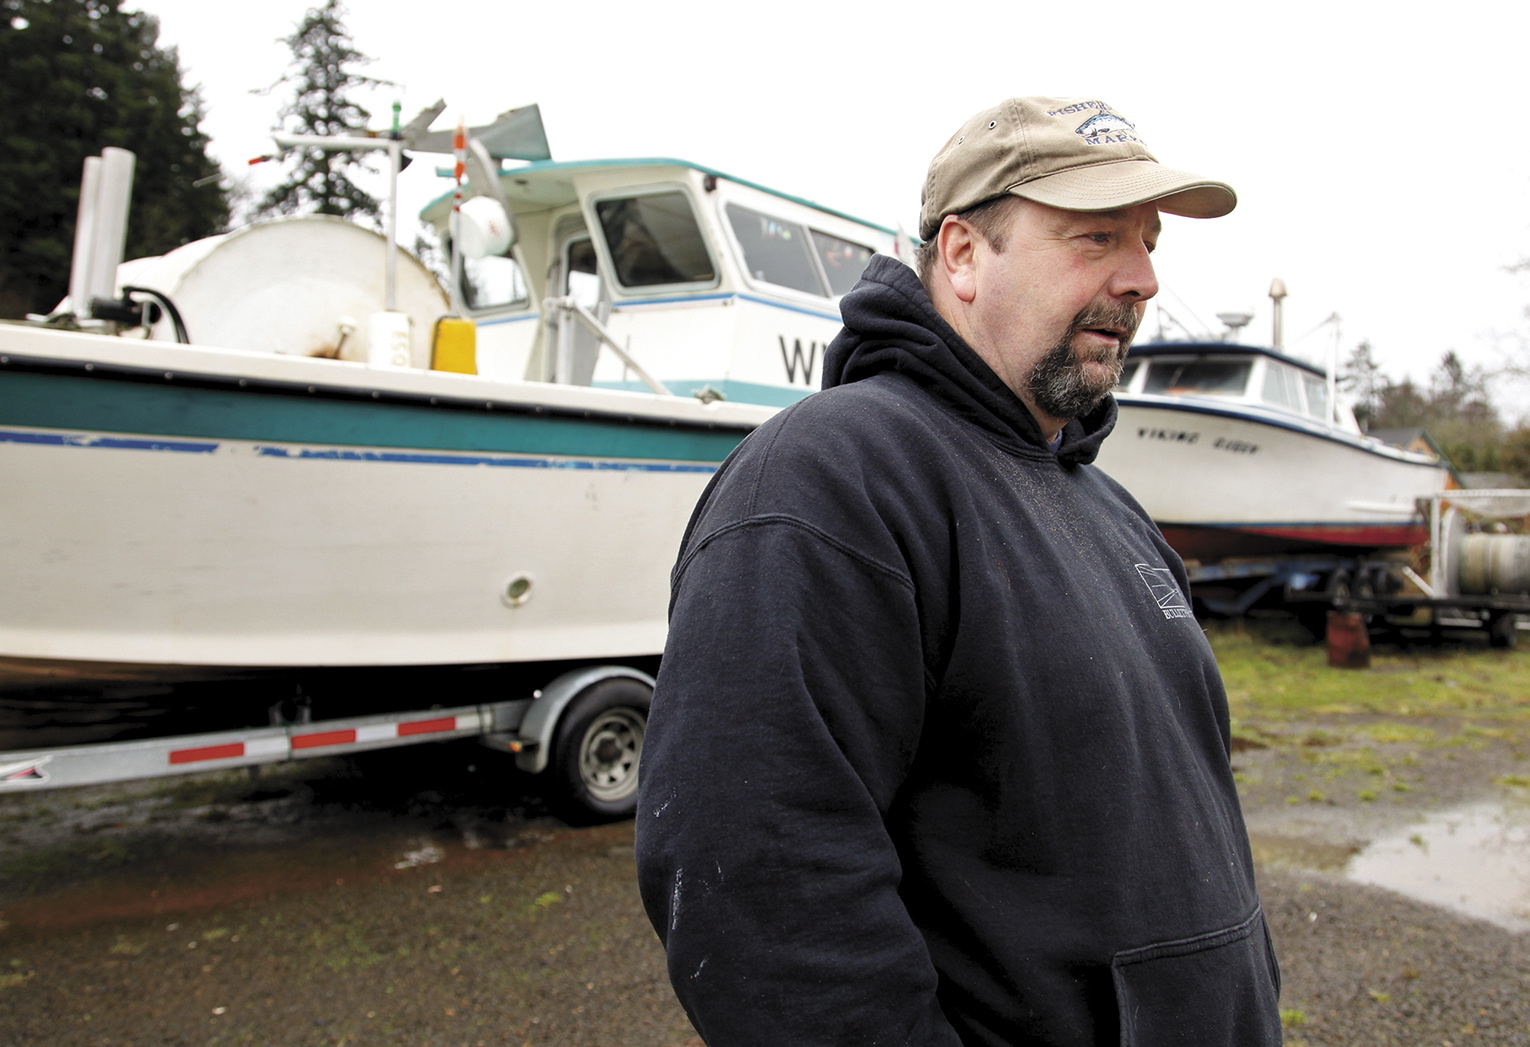 Wahkiakum County commercial fisherman Marty Kuller says he is giving up gillnetting in the lower Columbia River and moving his family to Arizona.